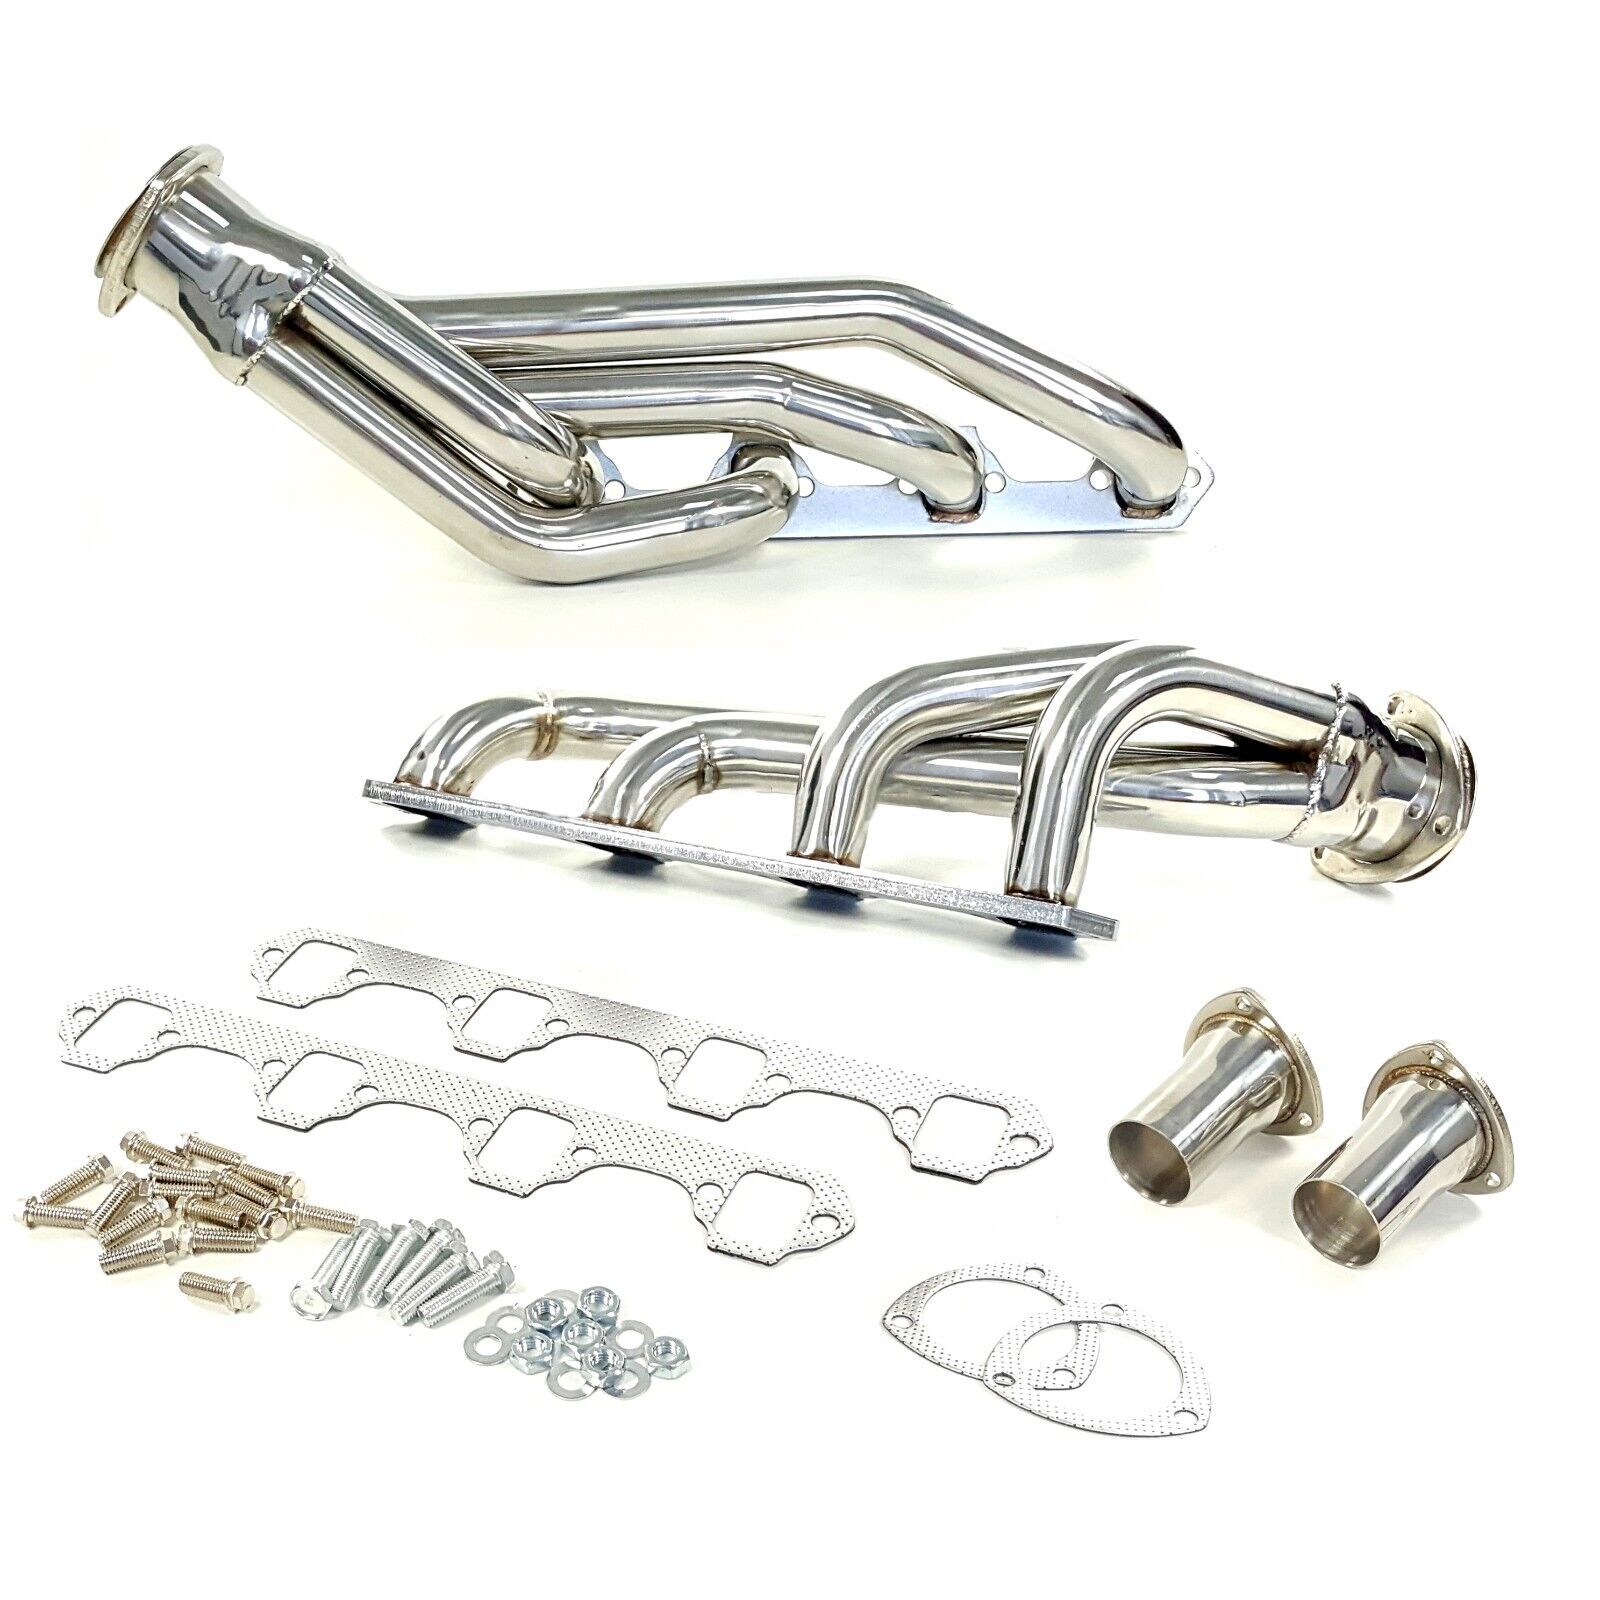 Mid Long Tube Exhaust Headers For Small Block Mustang Falcon 260 289 302 SBF